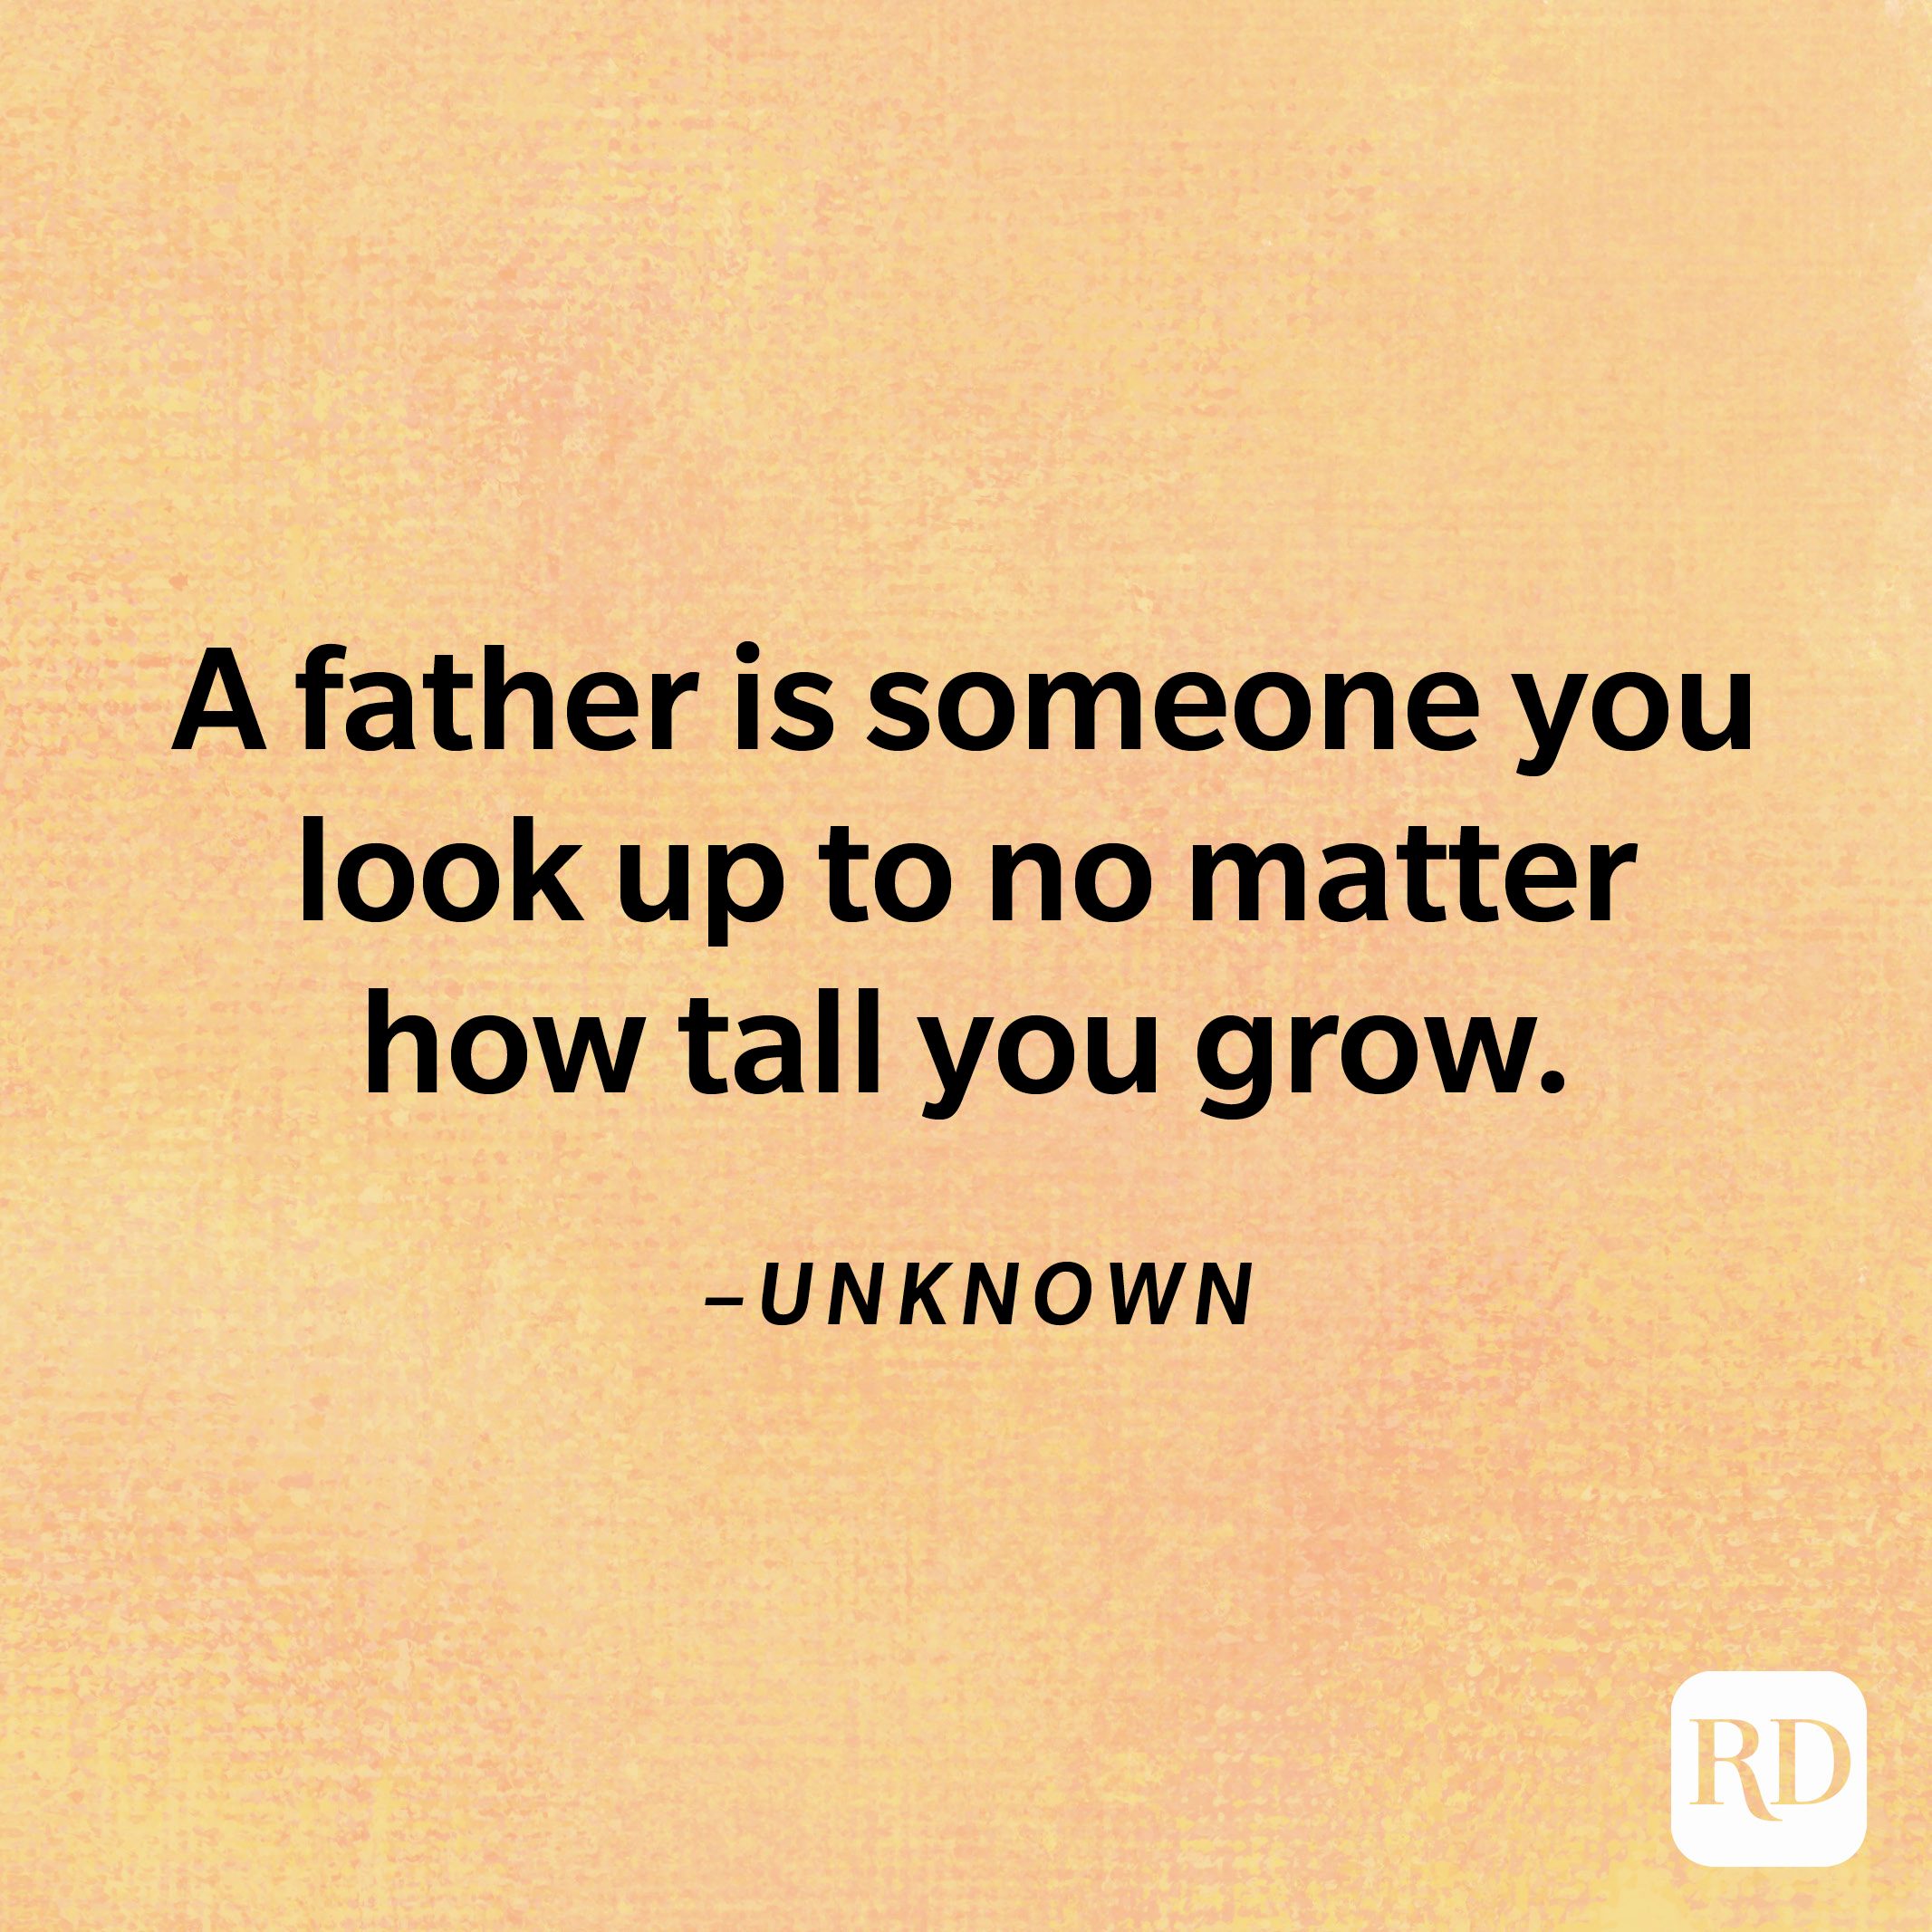 “A father is someone you look up to no matter how tall you grow.”— Unknown